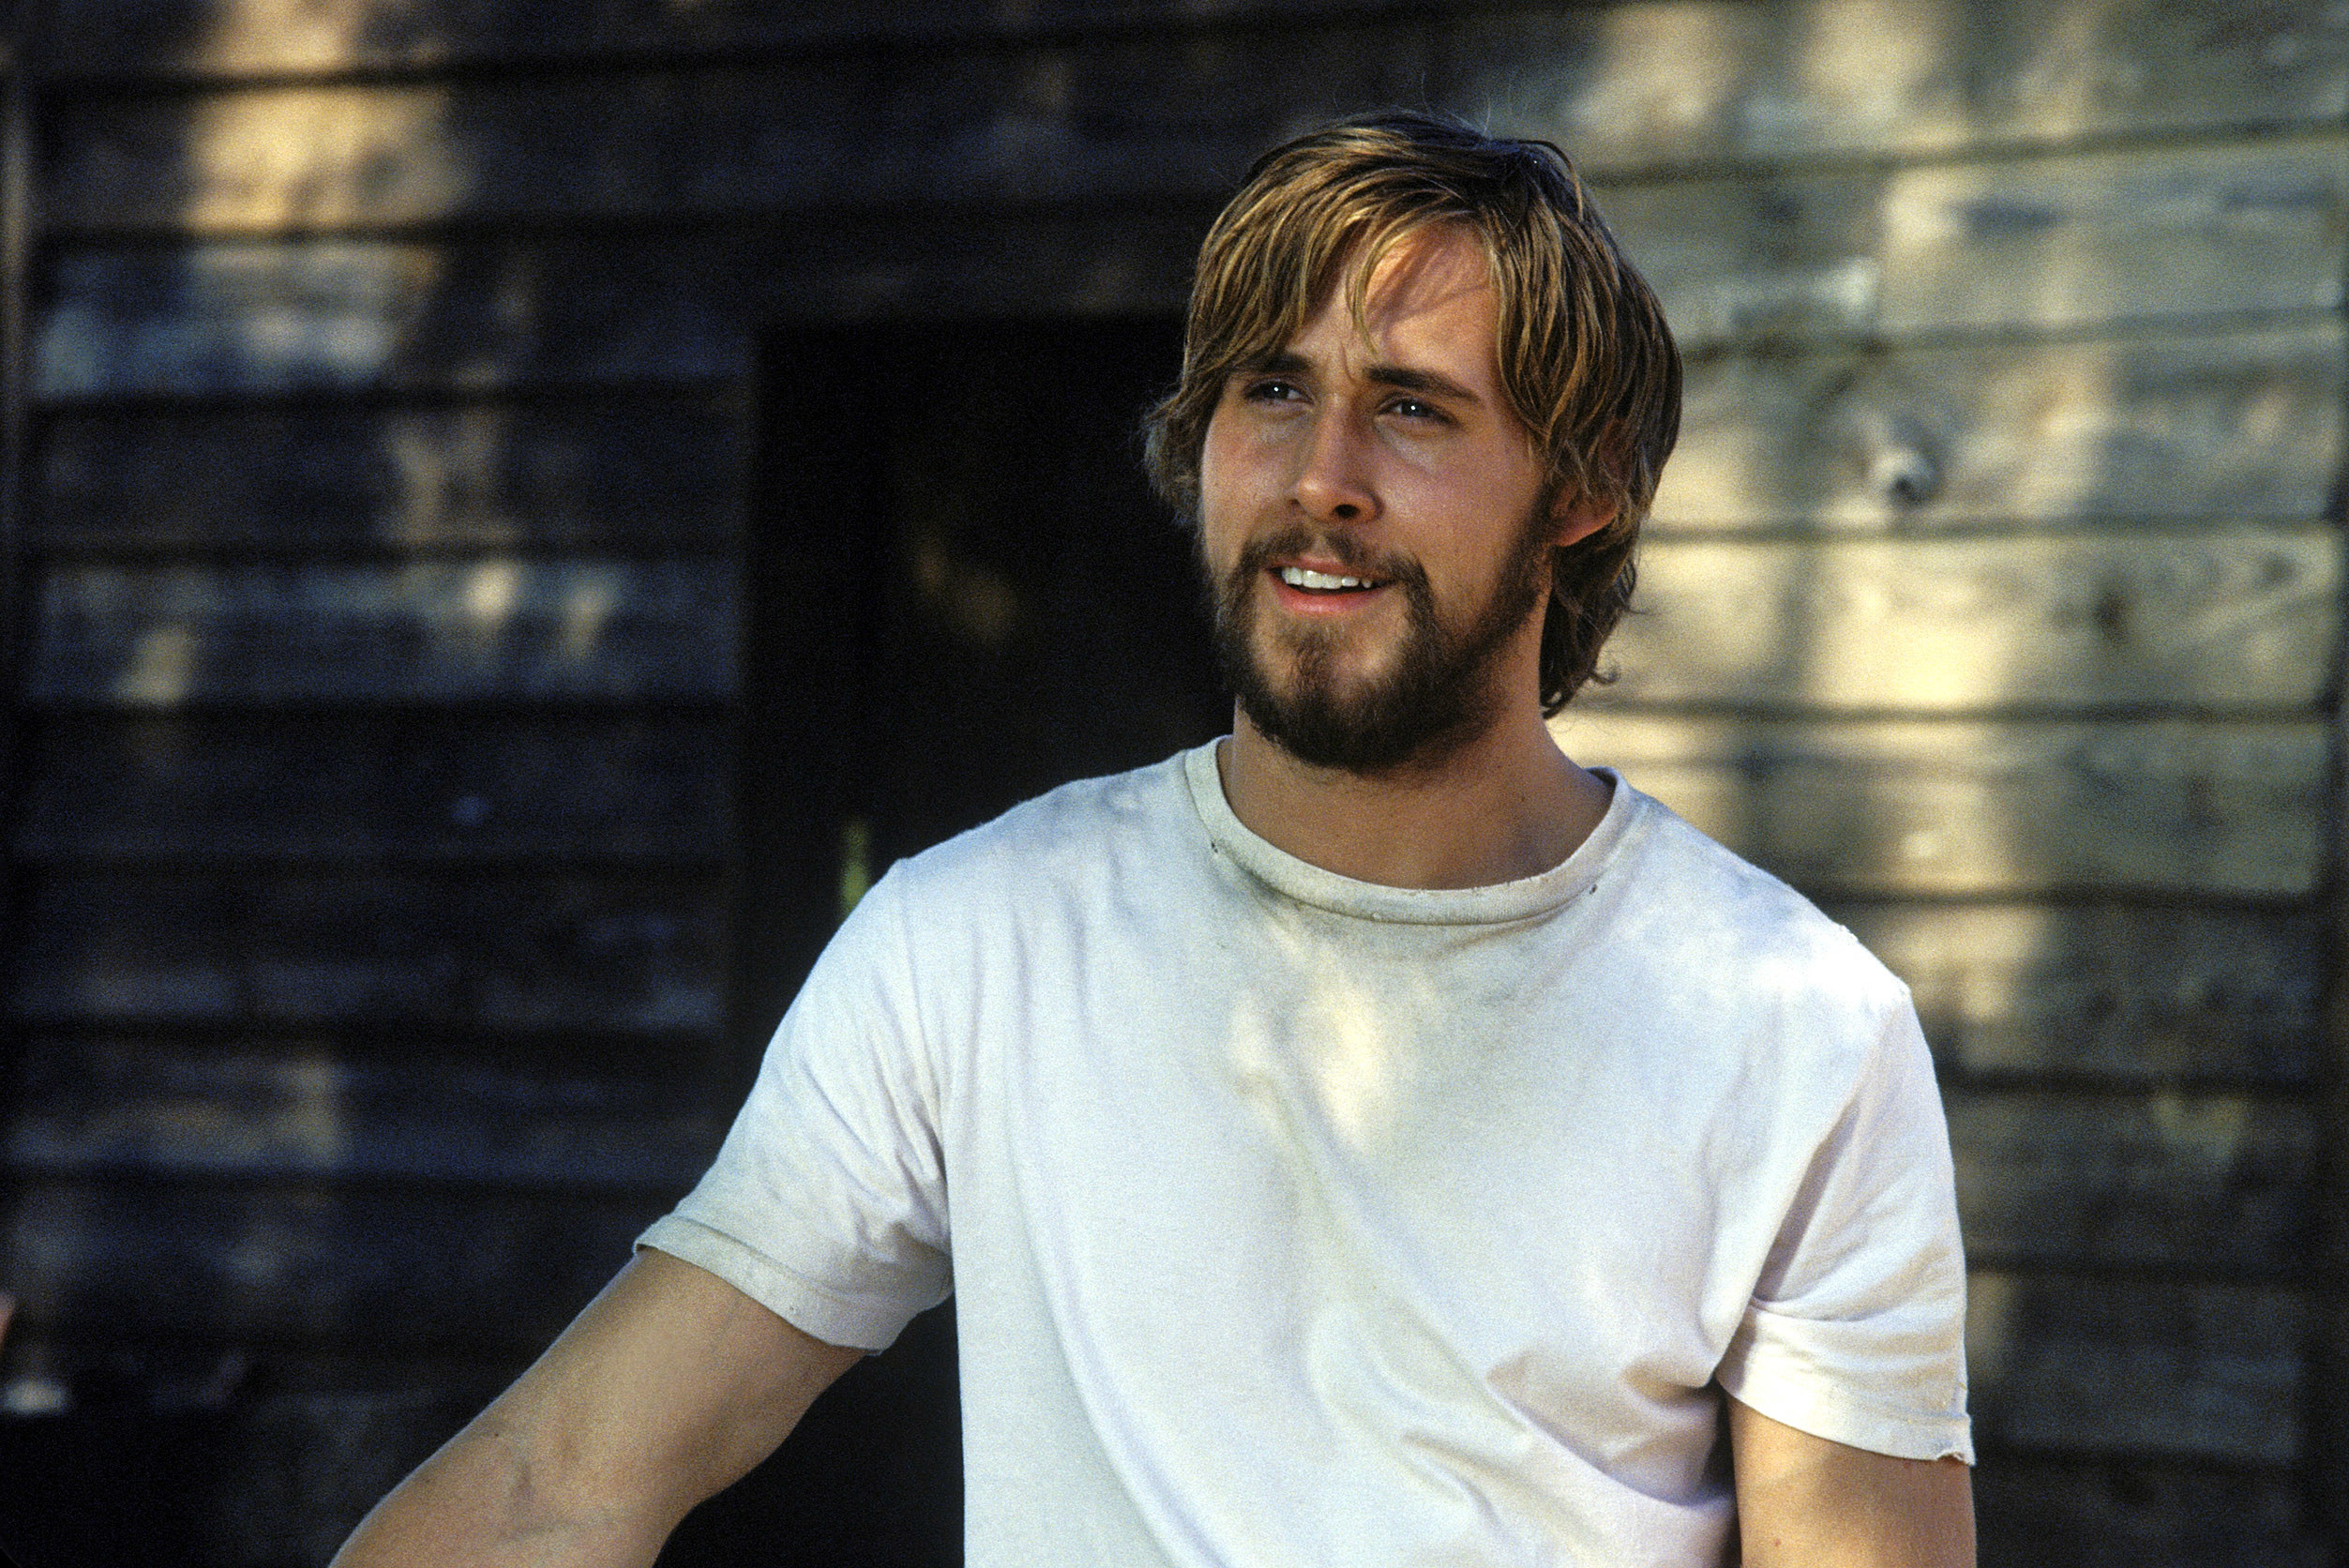 Ryan Gosling as Noah from &quot;The Notebook&quot;